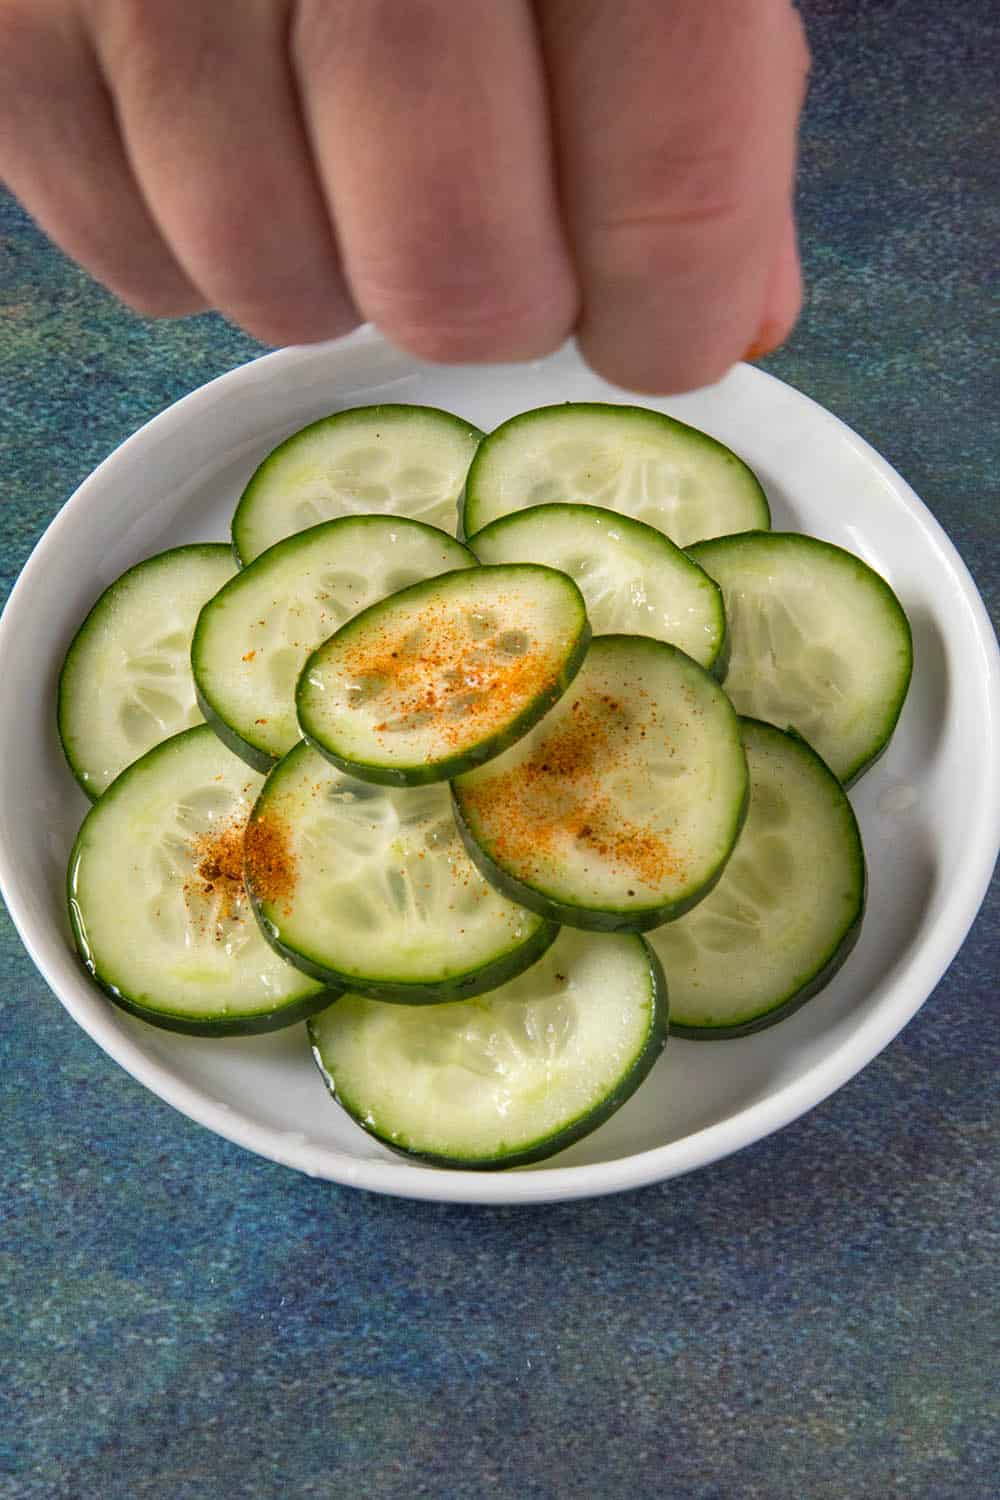 Sprinkling chili powder over the cucumber slices